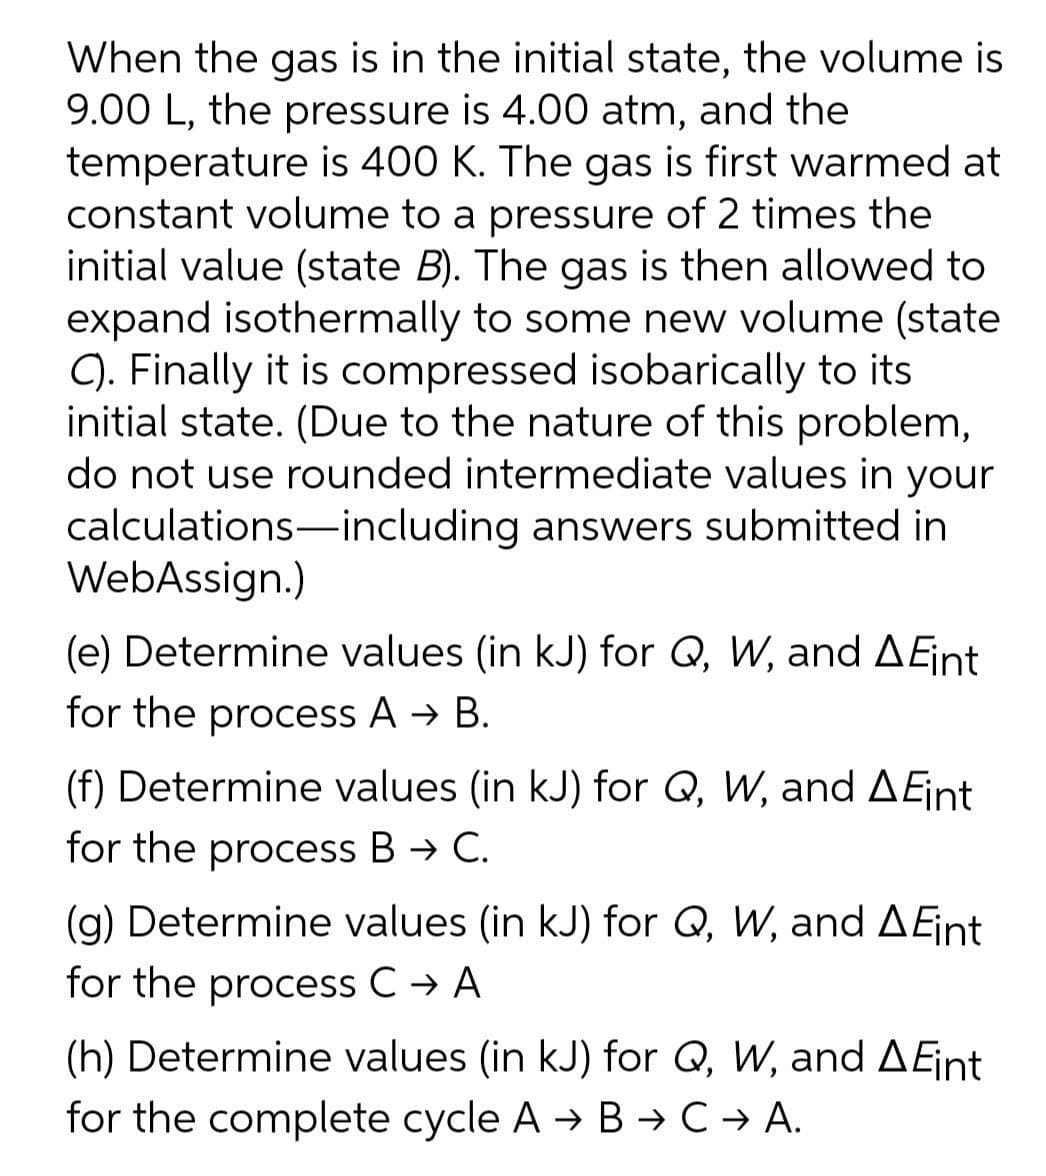 When the gas is in the initial state, the volume is
9.00 L, the pressure is 4.00 atm, and the
temperature is 400 K. The gas is first warmed at
constant volume to a pressure of 2 times the
initial value (state B). The gas is then allowed to
expand isothermally to some new volume (state
C). Finally it is compressed isobarically to its
initial state. (Due to the nature of this problem,
do not use rounded intermediate values in your
calculations-including answers submitted in
WebAssign.)
|
(e) Determine values (in kJ) for Q, W, and AEjint
for the process A → B.
(f) Determine values (in kJ) for Q, W, and AEint
for the process B → C.
(g) Determine values (in kJ) for Q, W, and AEjint
for the process C → A
(h) Determine values (in kJ) for Q, W, and AEint
for the complete cycle A → B →C → A.
